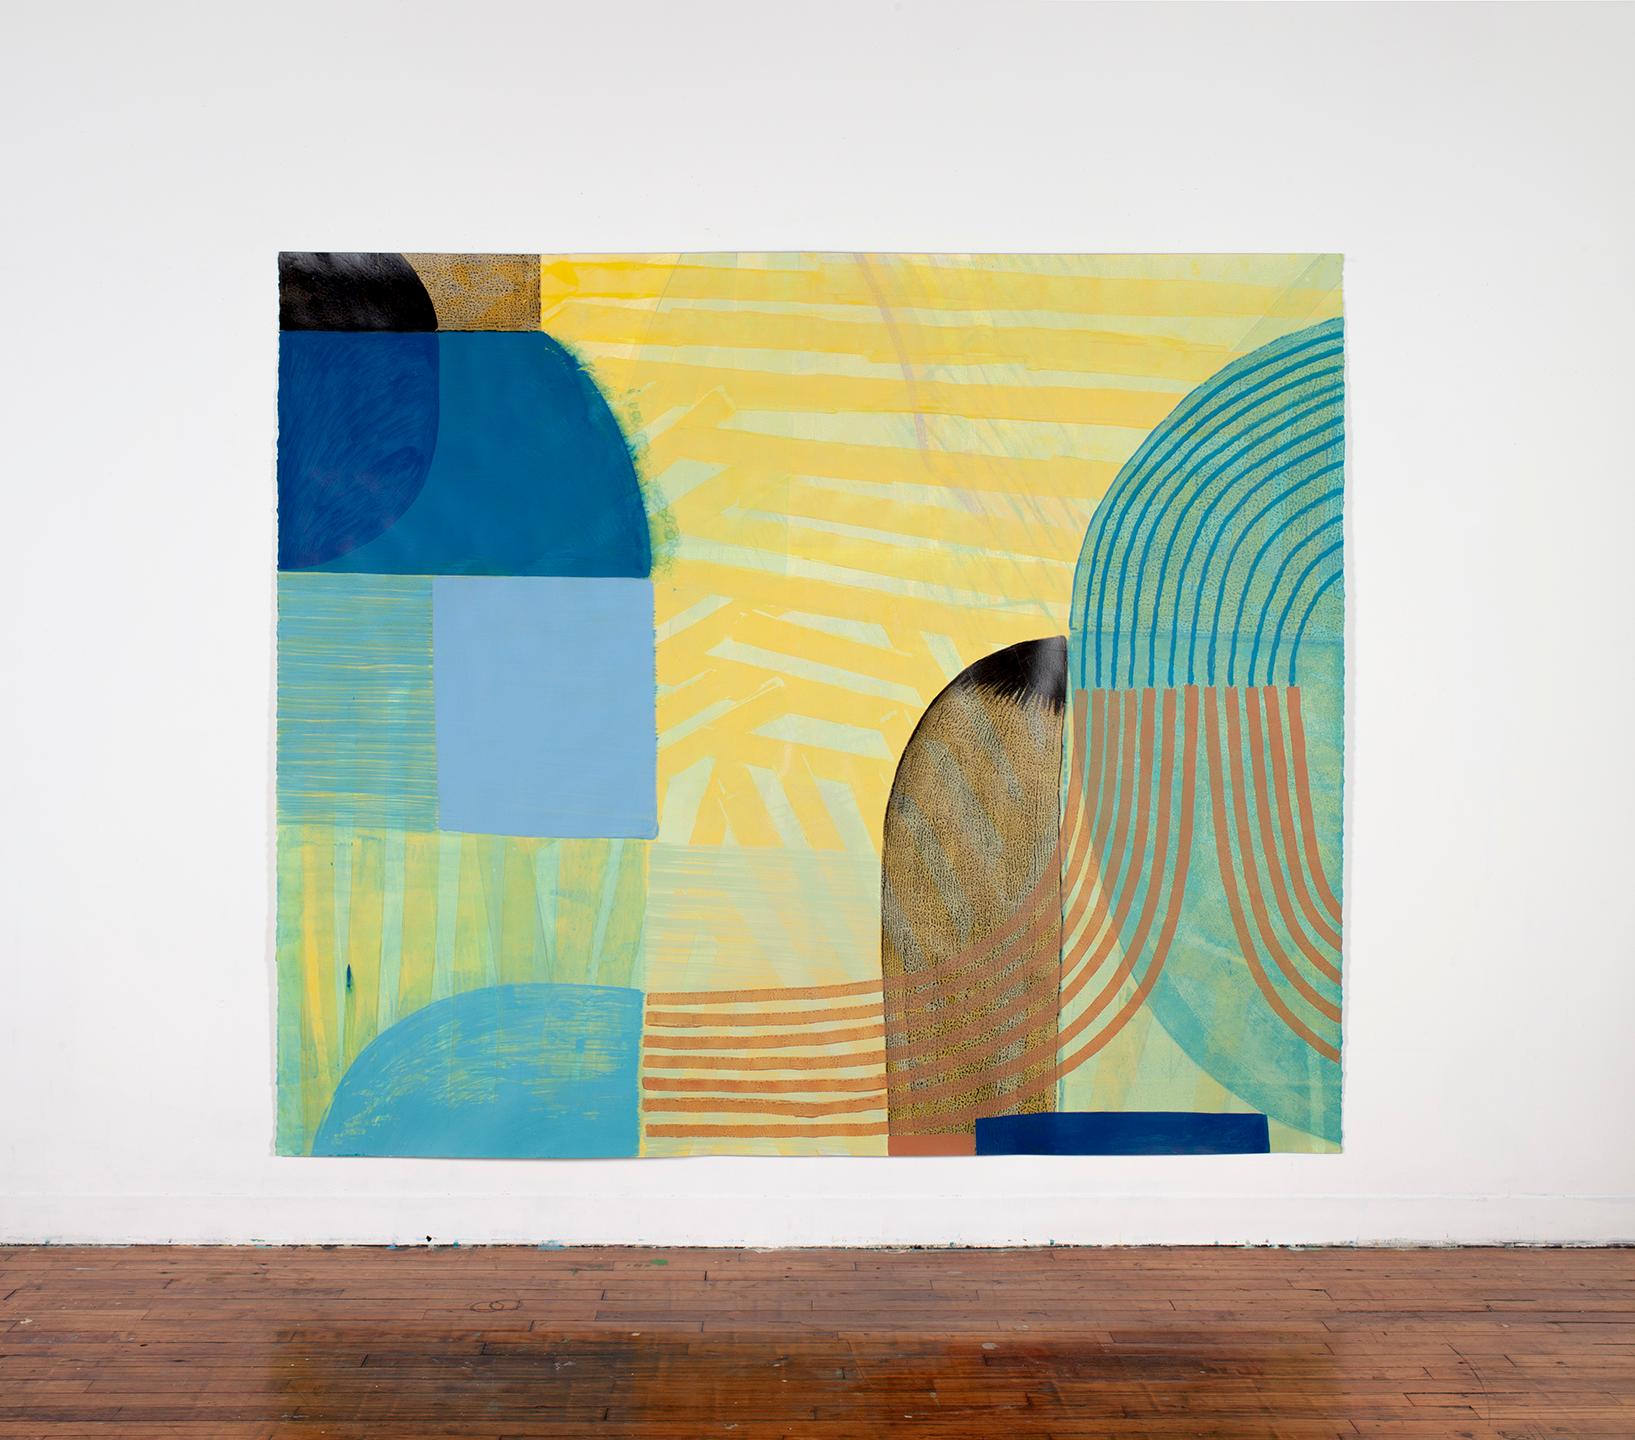 Ky Anderson
Feelers, 2019
pigment and acrylic on paper
72 x 84 in.
(and272ap)

This original painting on paper by Ky Anderson features bold shapes and curving lines in saturated shades of yellow, blue, and brown.

Anderson’s paintings on canvas and